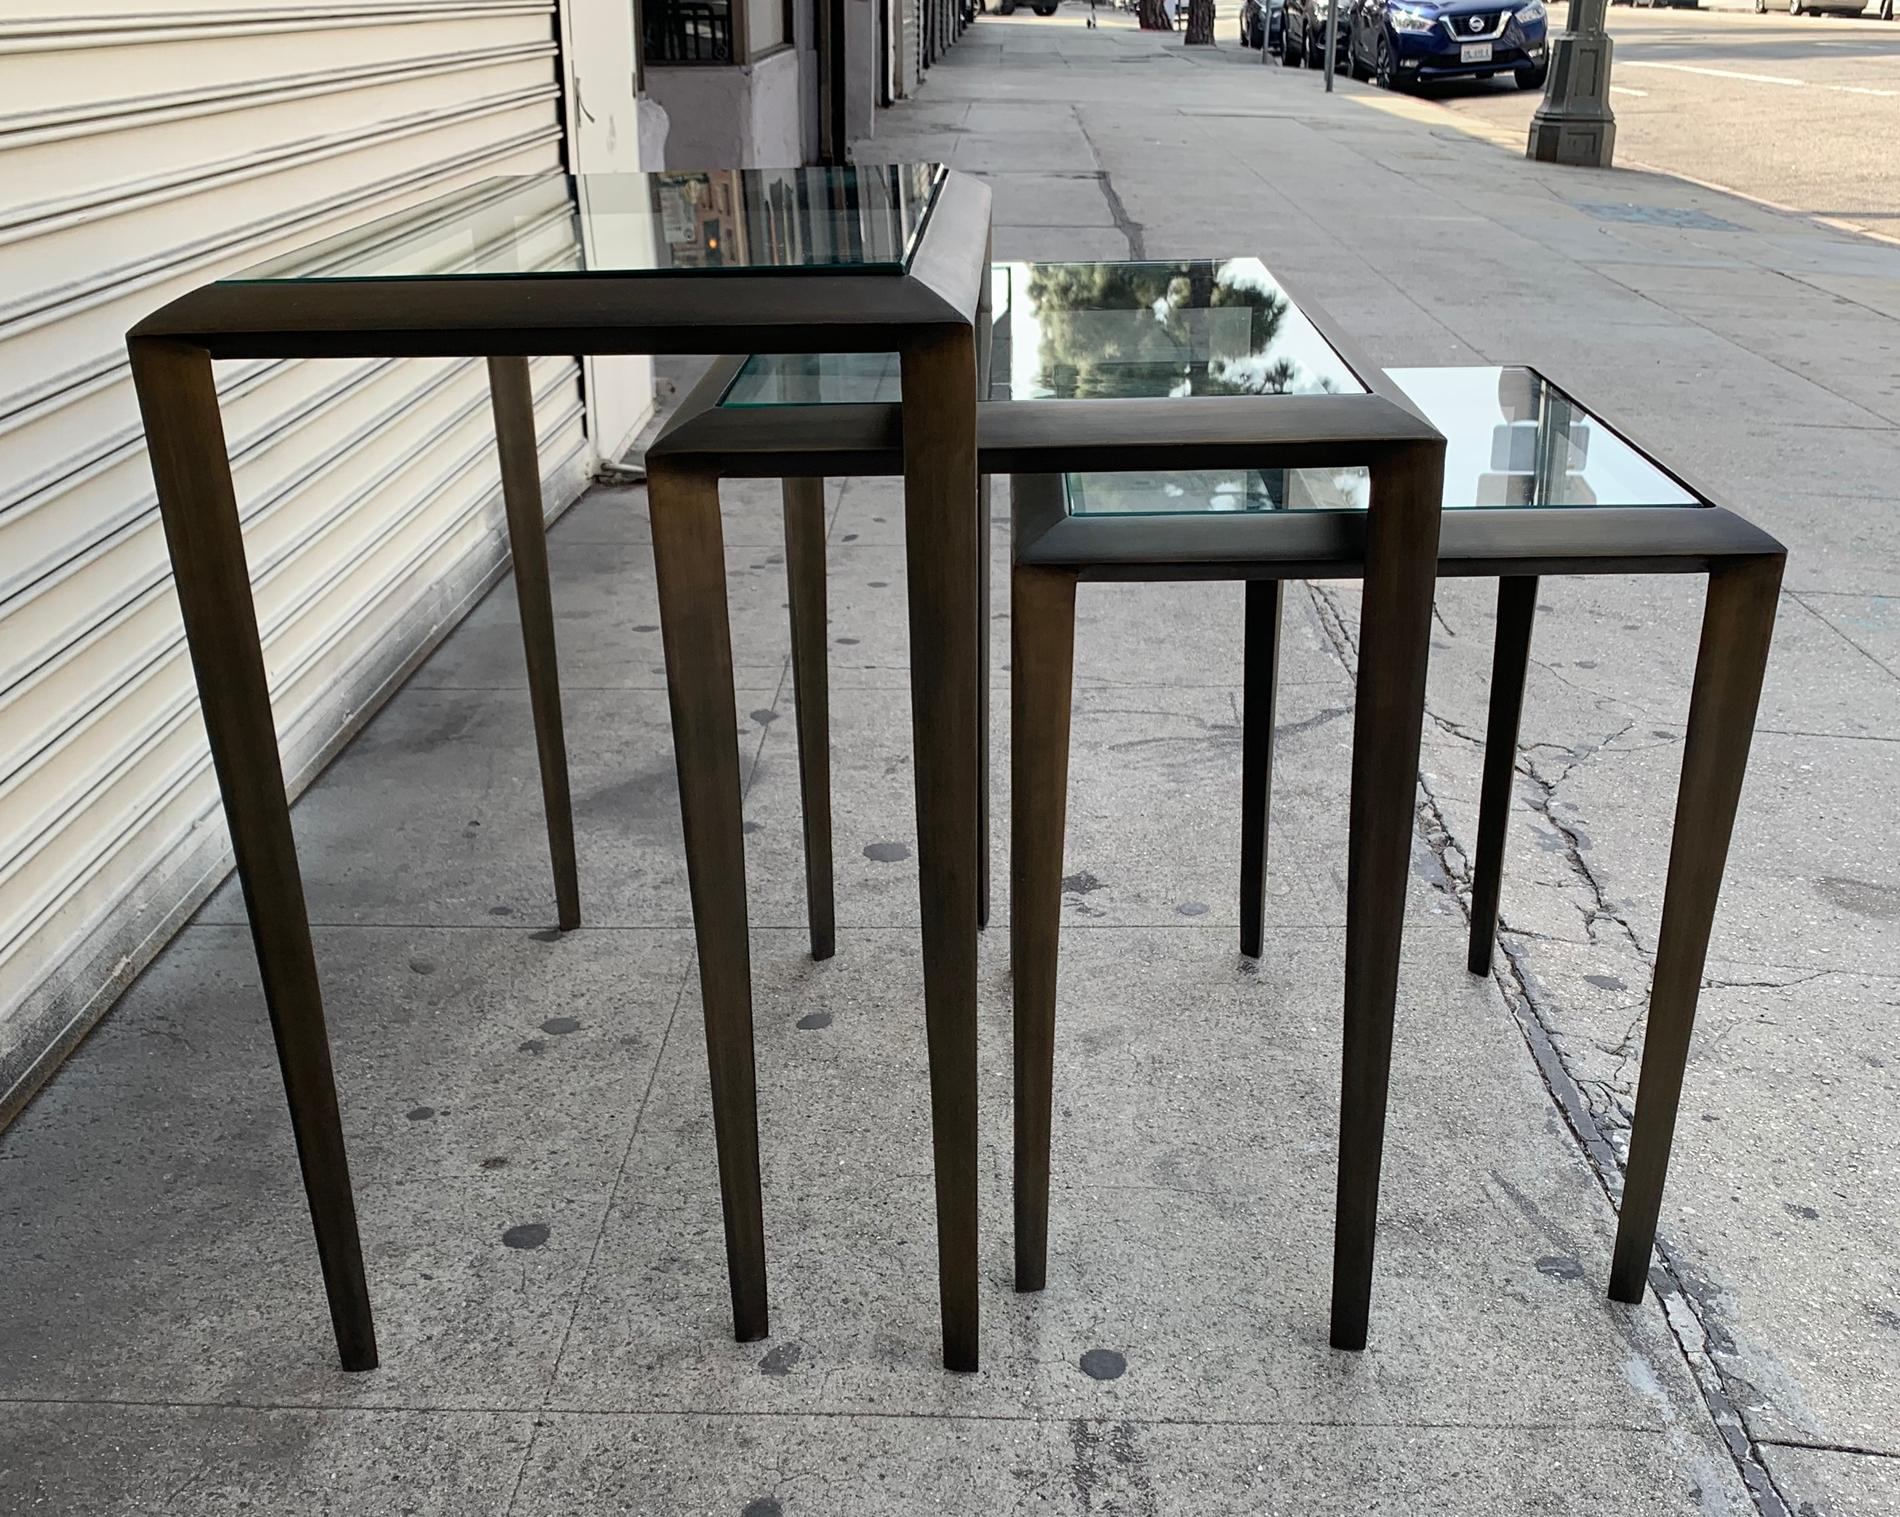 American Set of 3 Nesting Tables in Antique Brass